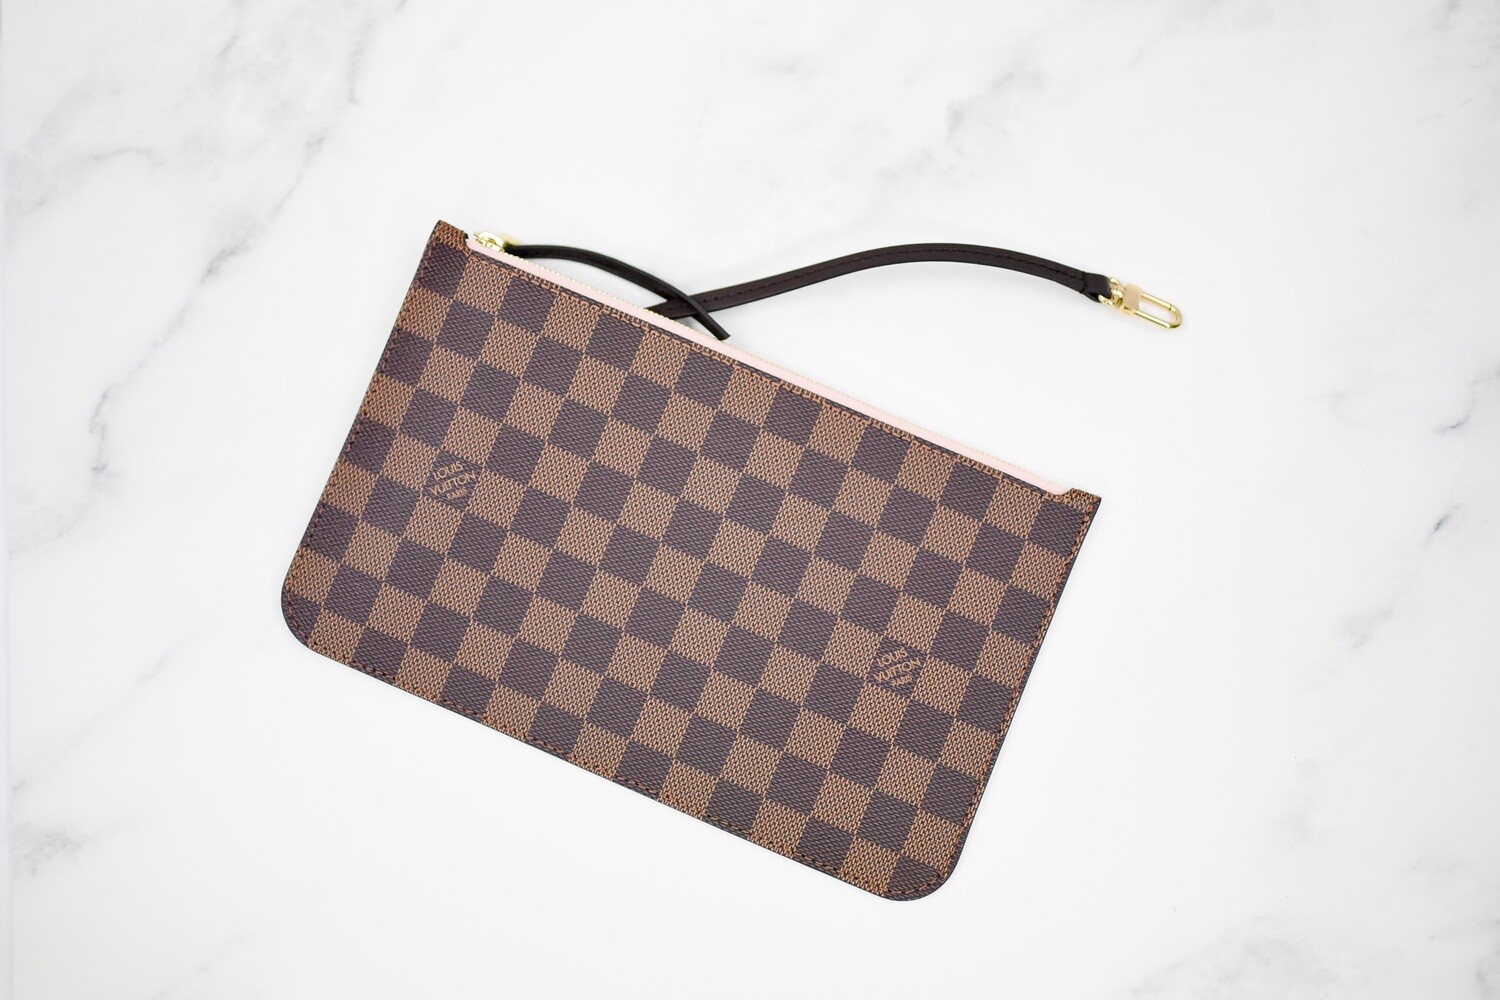 Louis Vuitton Neverfull MM Damier Ebene Wristlet, New without